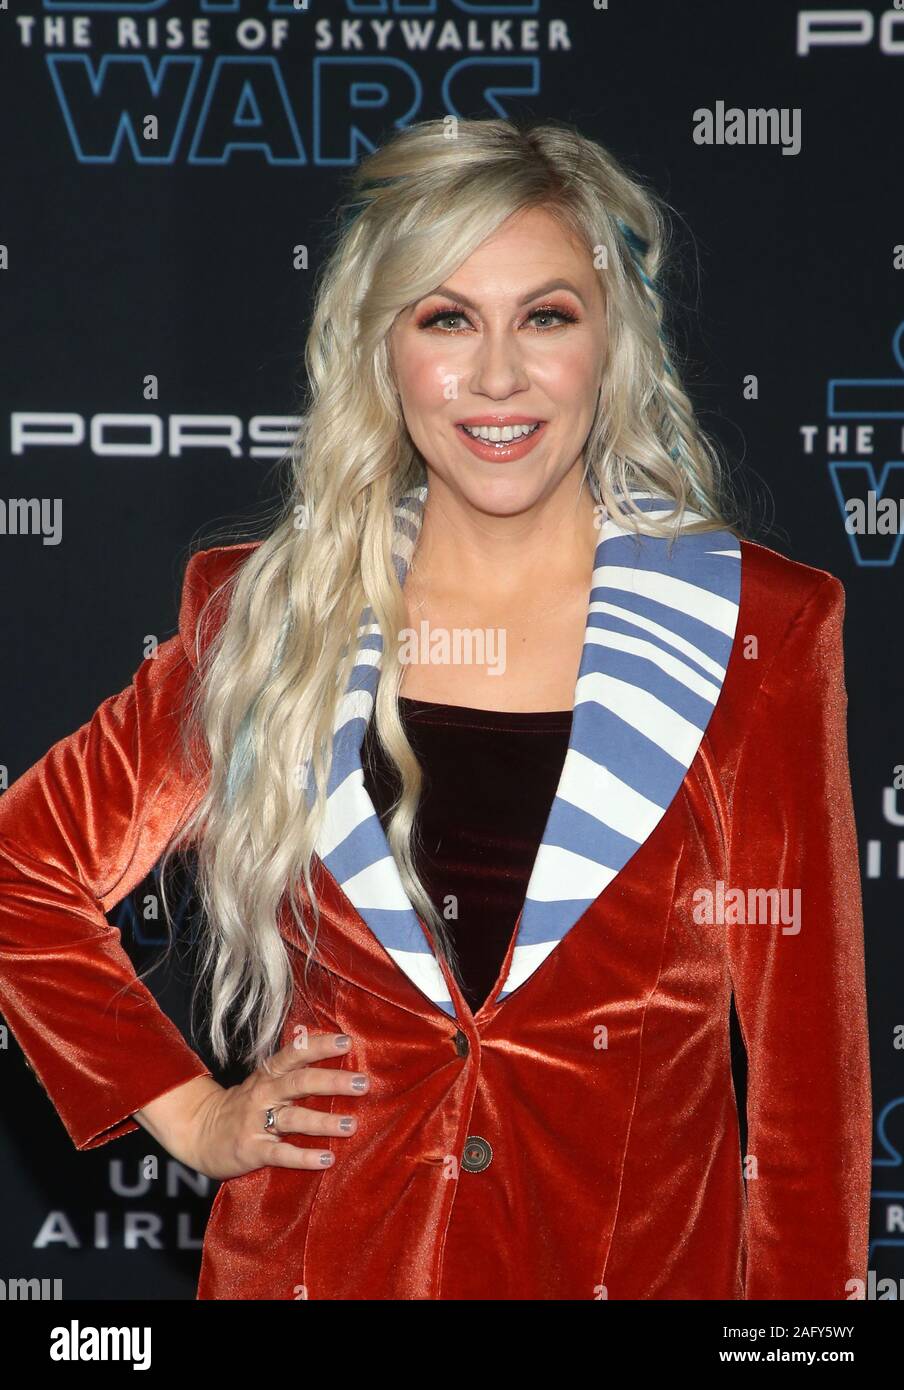 Hollywood, Ca. 16th Dec, 2019. Ashley Eckstein, at the Premiere Of Disney's 'Star Wars: The Rise Of Skywalker' at the El Capitan theatre in Hollywood, California on December 16, 2019. Credit: Faye Sadou/Media Punch/Alamy Live News Stock Photo